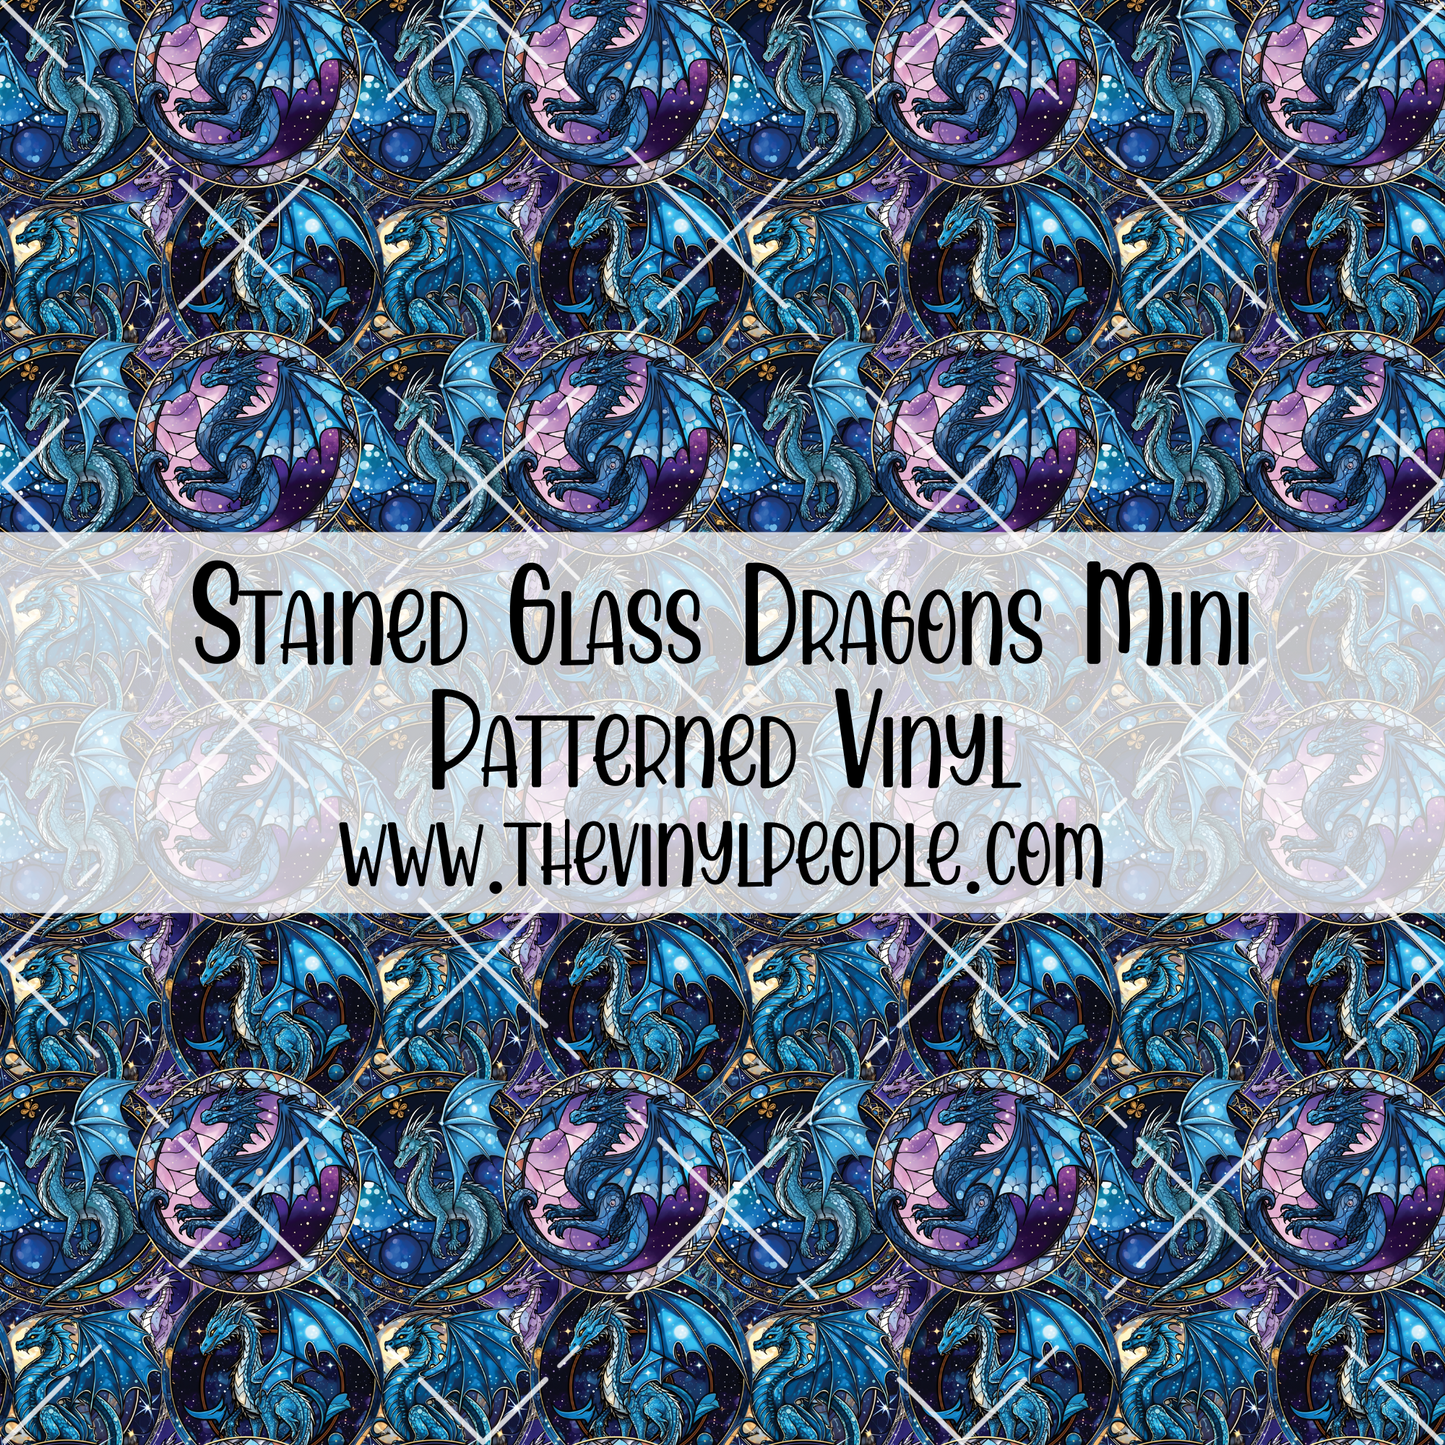 Stained Glass Dragons Patterned Vinyl